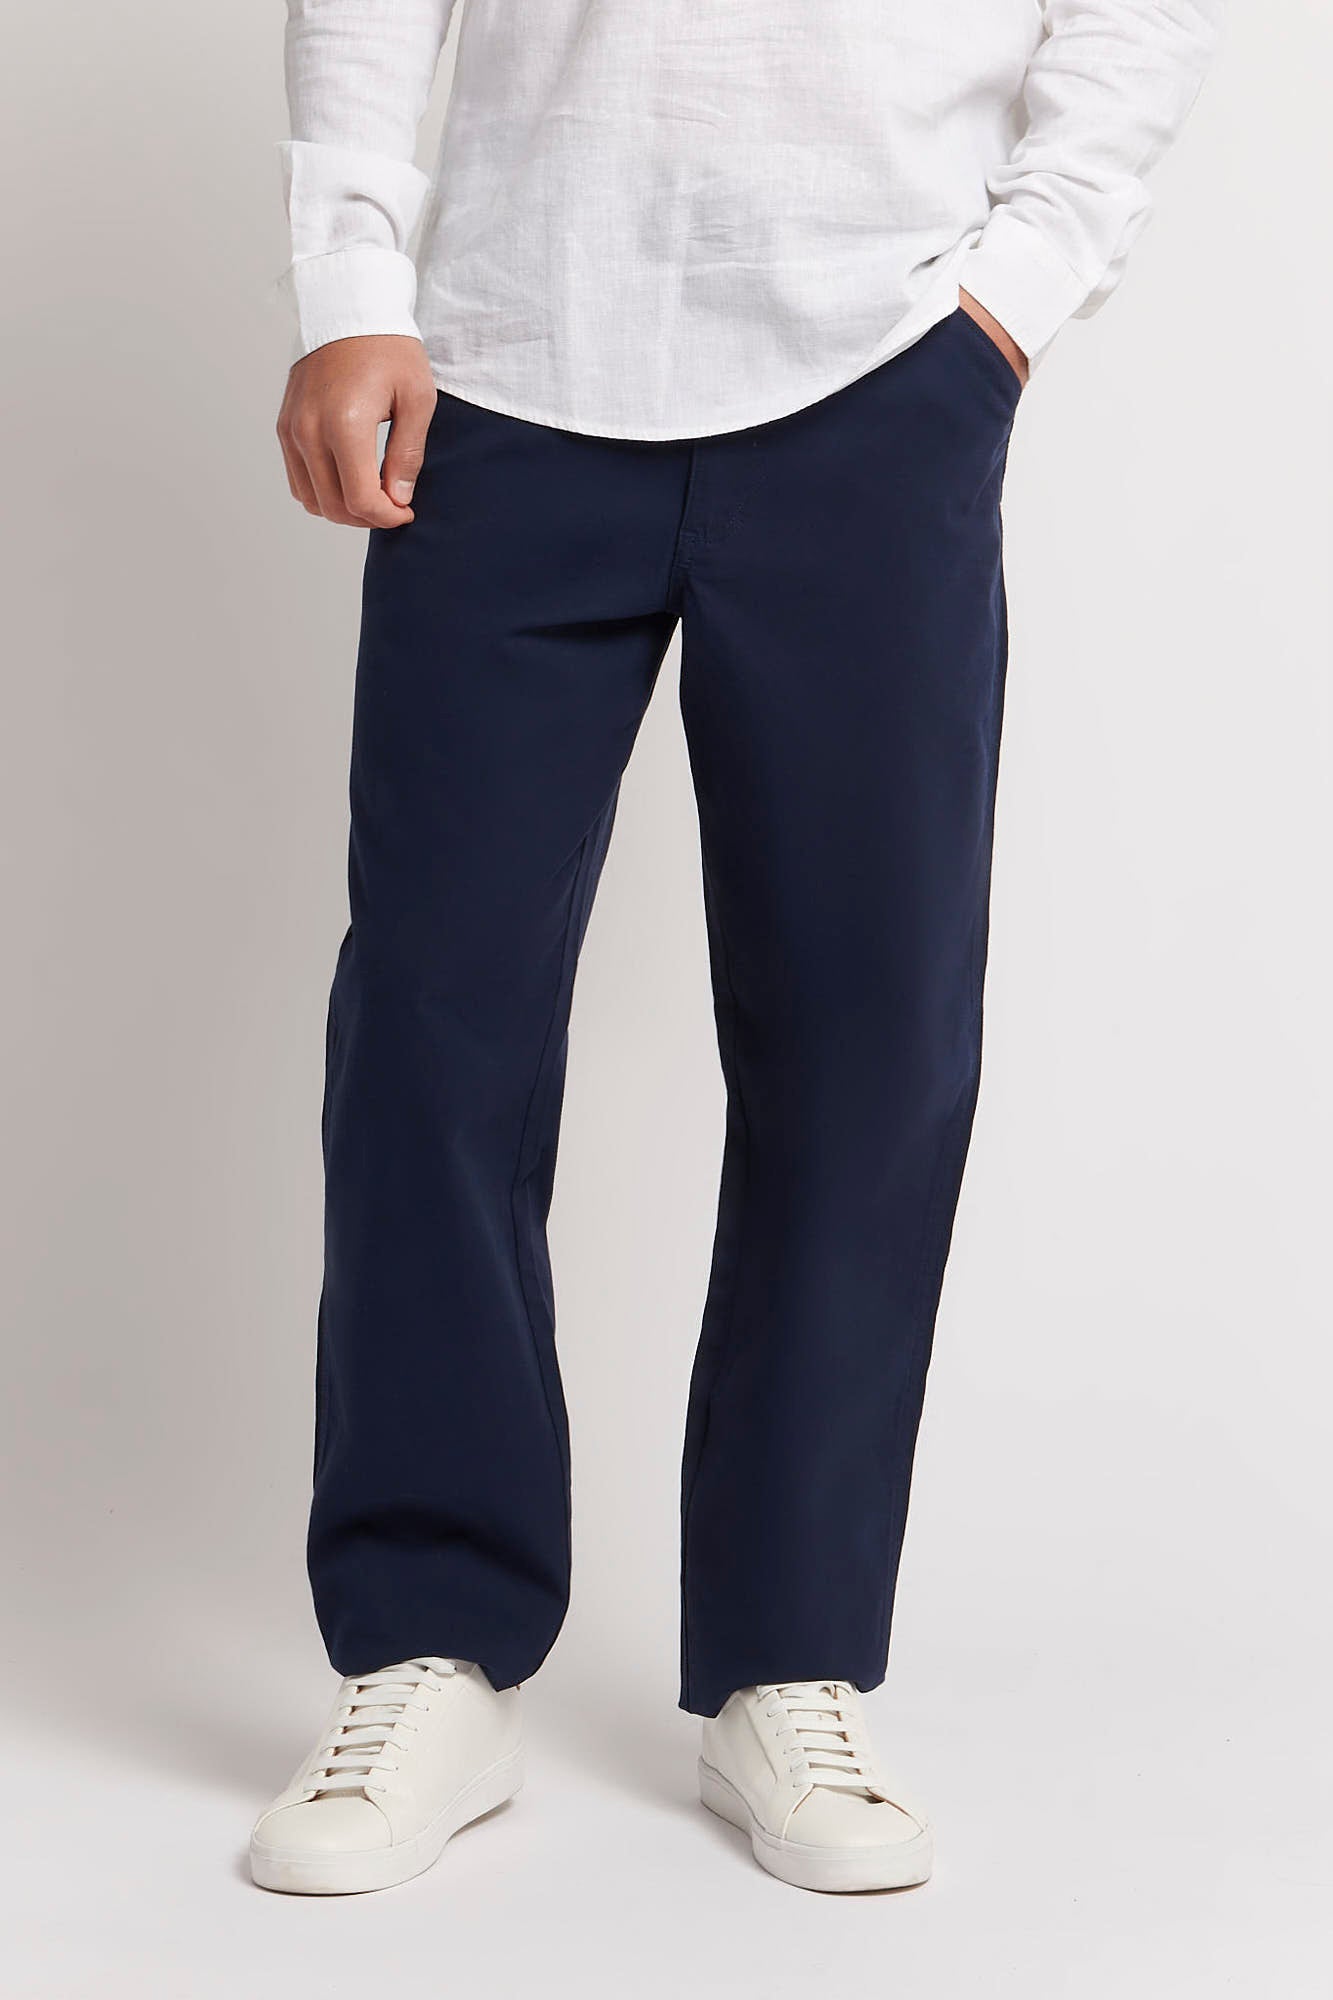 U.S. Polo Assn. Mens Worker Trousers in Navy Blue